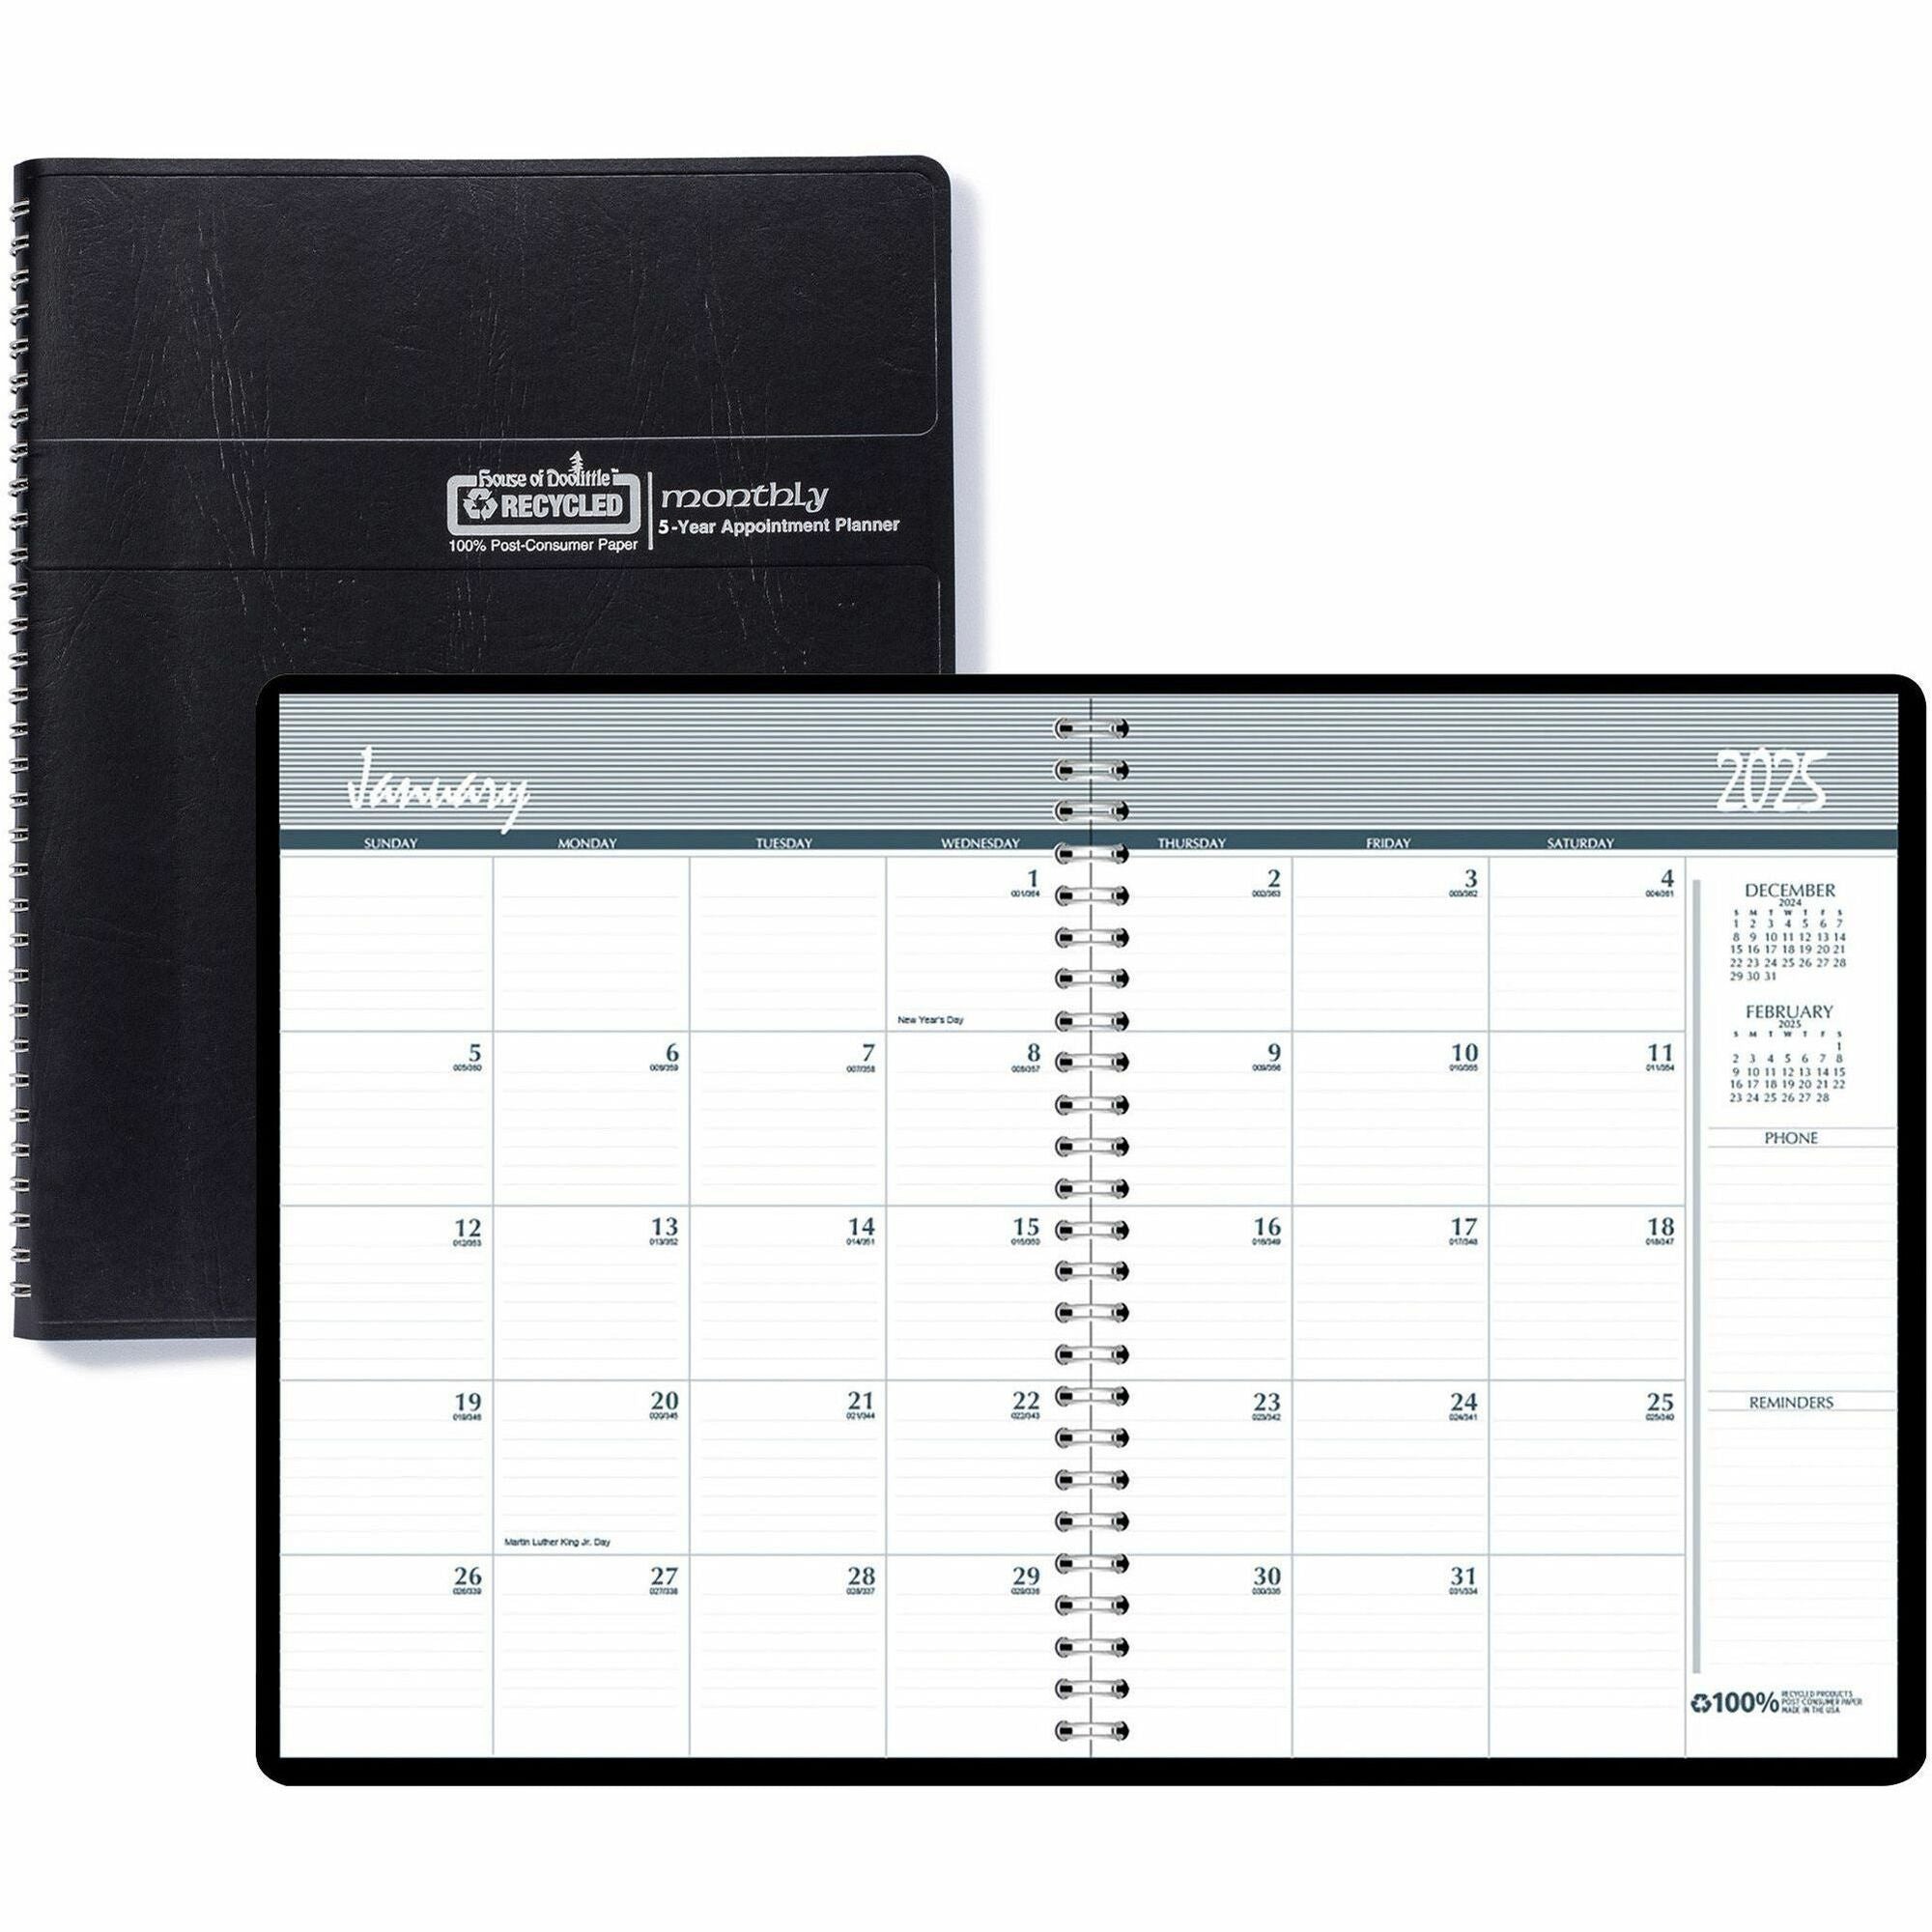 house-of-doolittle-planner-julian-dates-52-year-december-january-1-month-double-page-layout-spiral-bound-black-black-11-height-x-85-width-dated-planning-page-ruled-daily-block-holiday-listing-reminder-section-phone-log-pag_hod262502 - 1